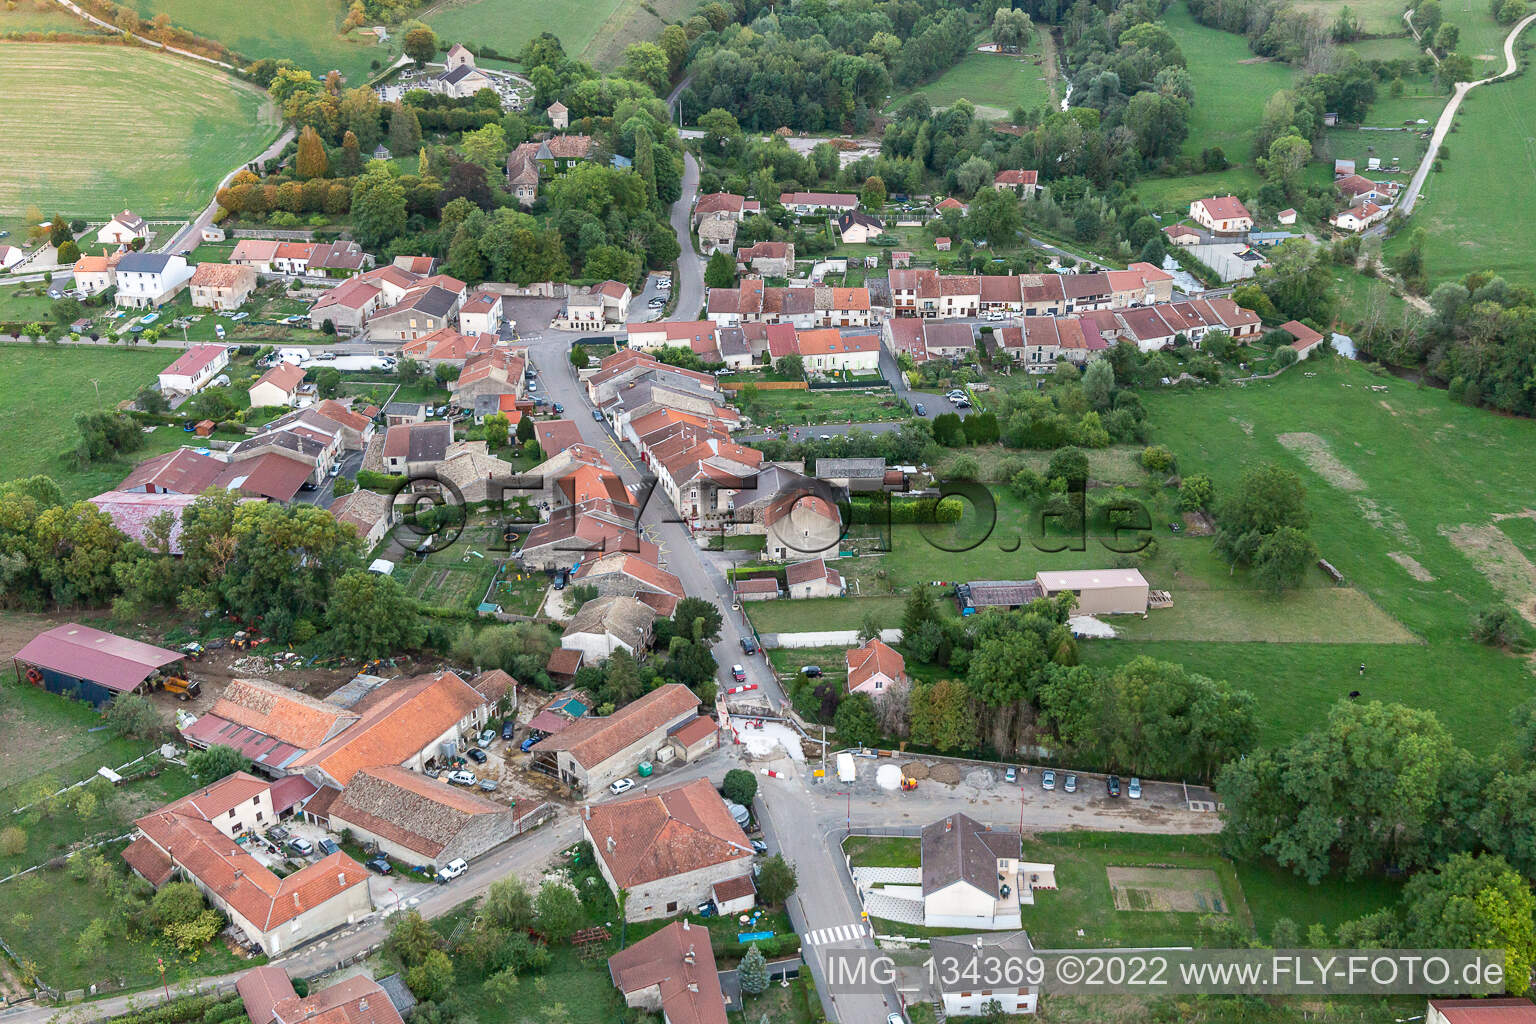 Noncourt-sur-le-Rongeant in the state Haute Marne, France from above